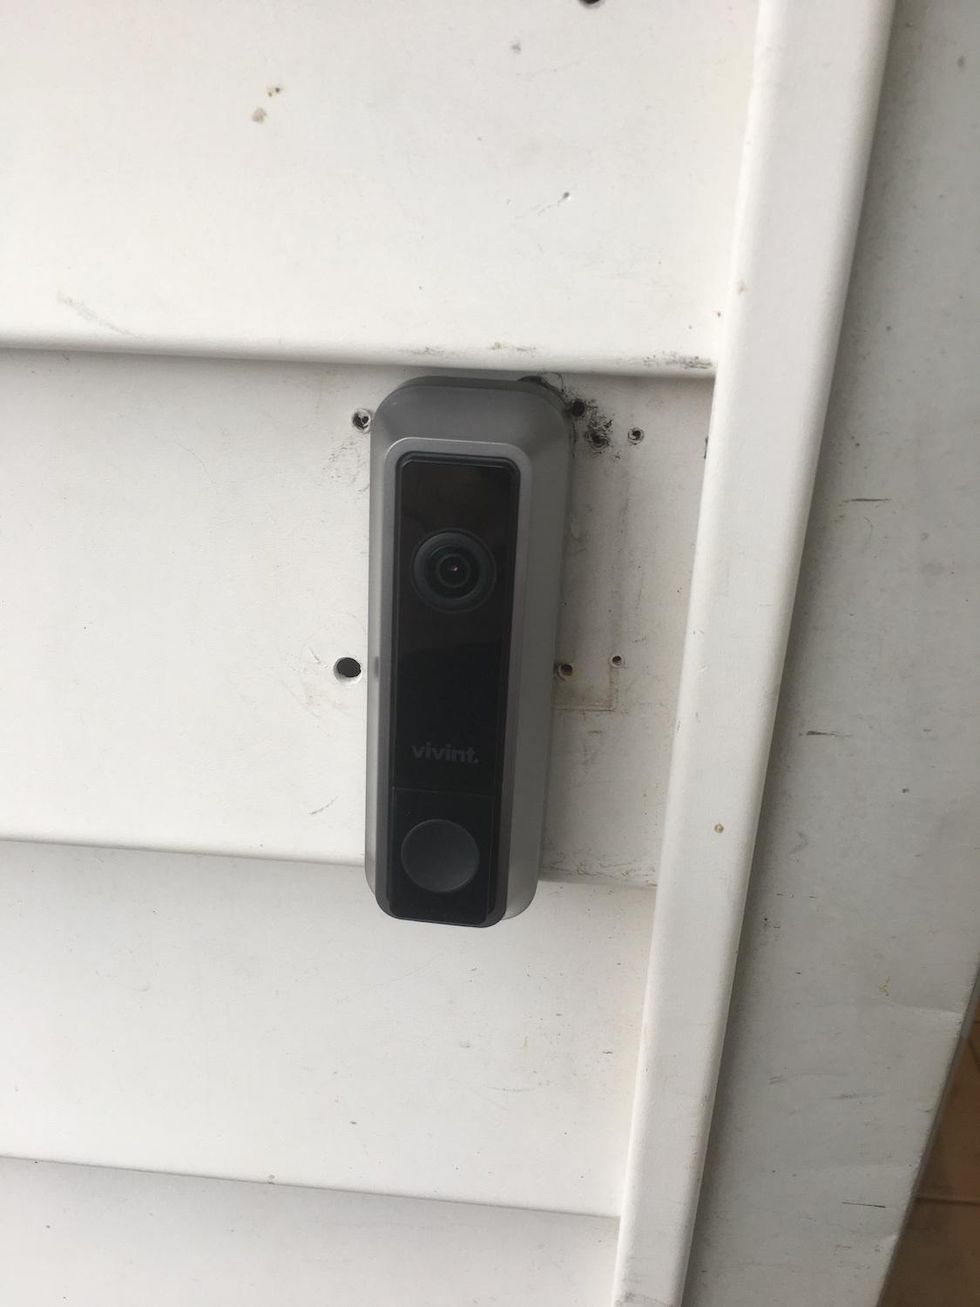 Vivint Video Doorbell installed on the side of the house.